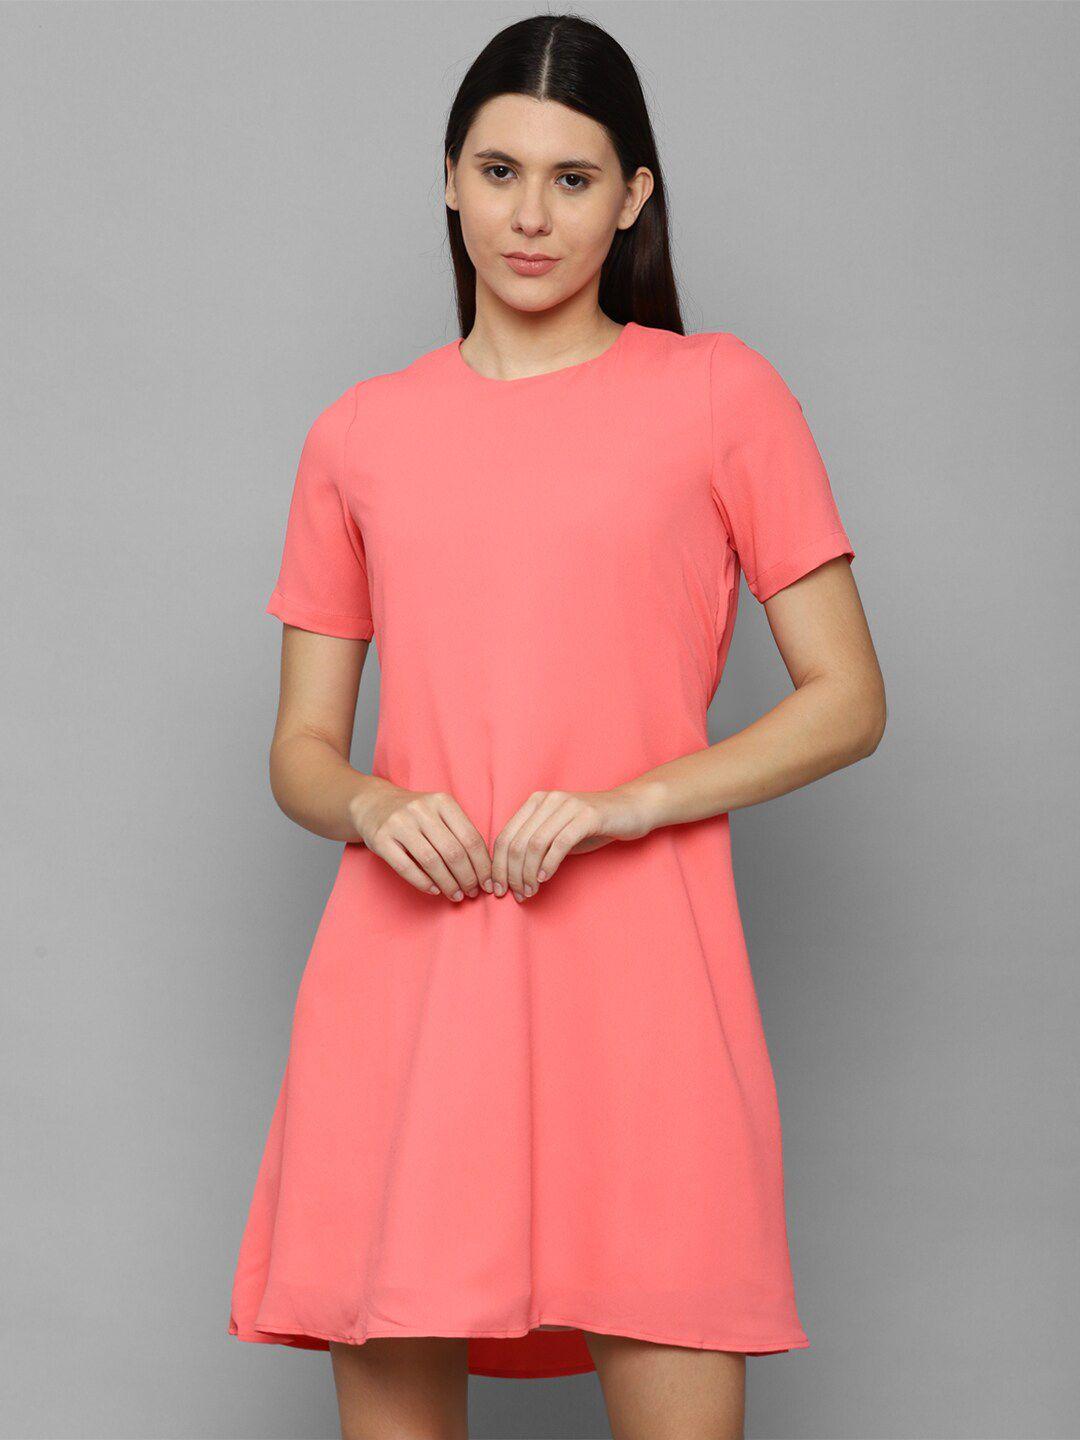 allen-solly-woman-peach-coloured-solid-a-line-dress